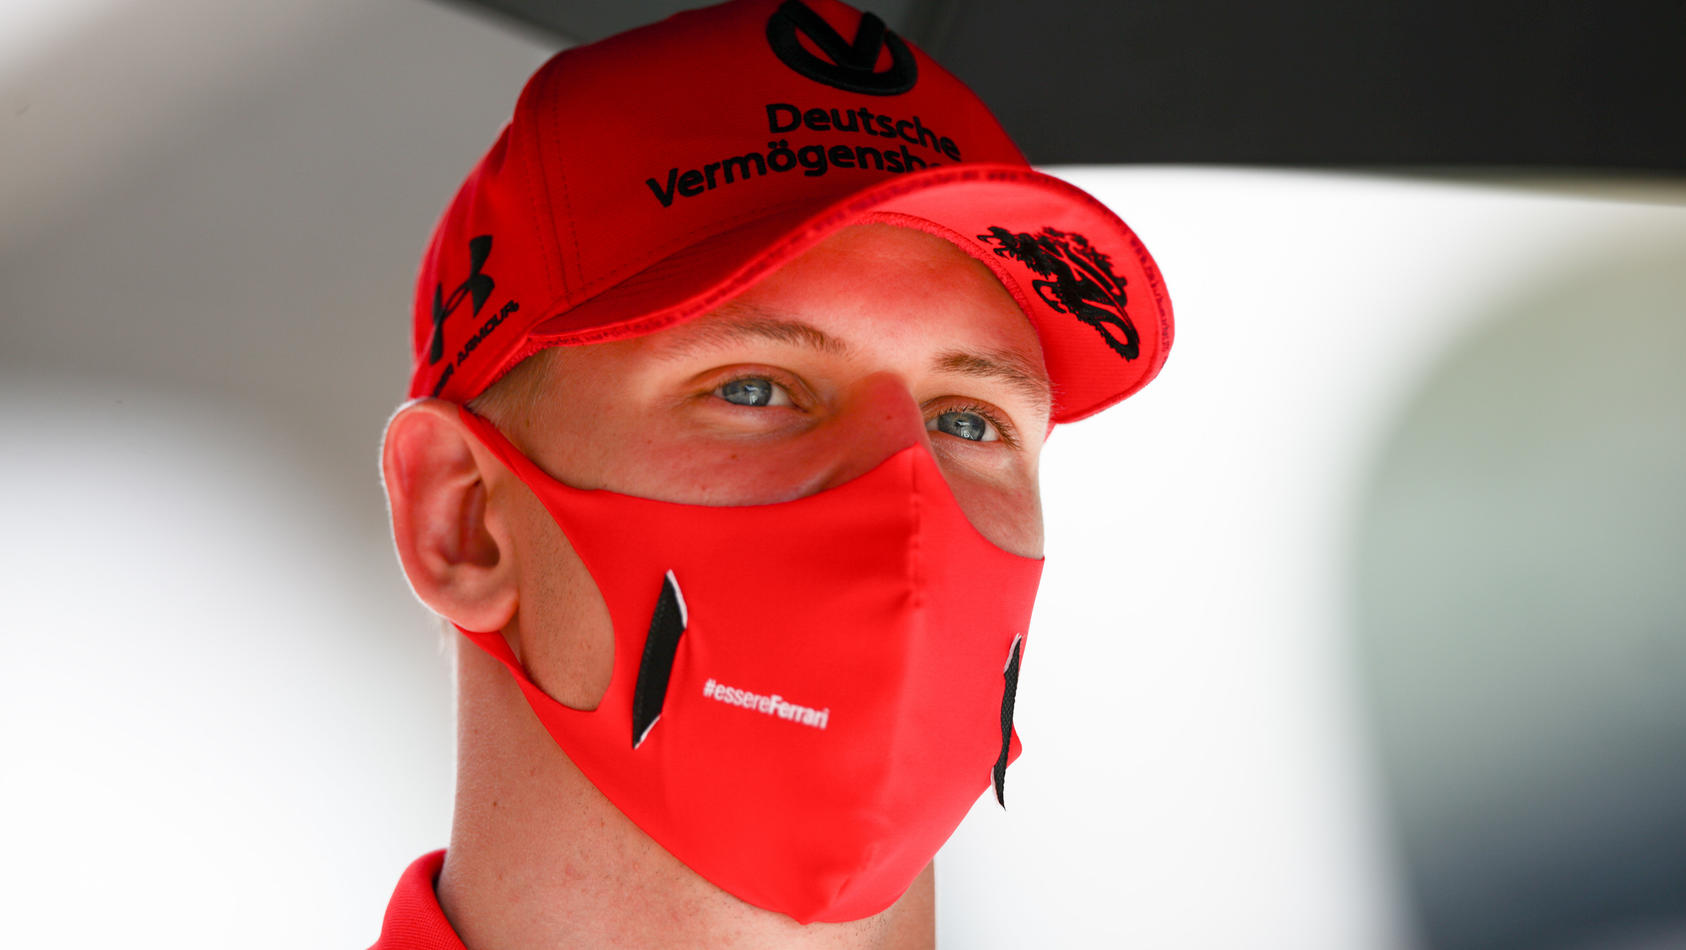 BARCELONA, SPAIN - AUGUST 13: Mick Schumacher of Germany and Prema Racing during previews ahead of the Formula 2 Championship at Circuit de Barcelona-Catalunya on August 13, 2020 in Barcelona, Spain. (Photo by Peter Fox/Getty Images)